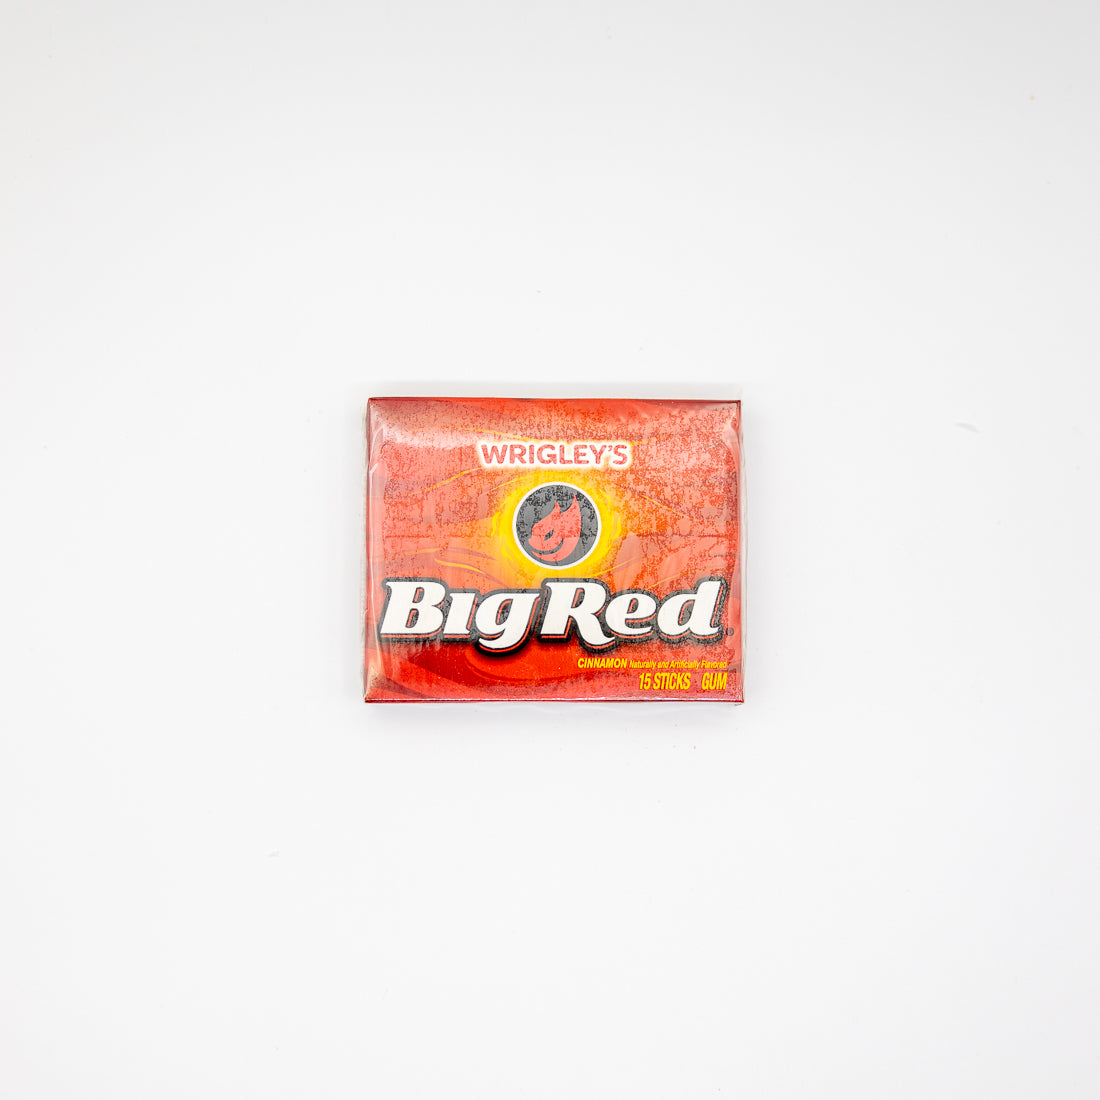 Big Red Chewing Gum